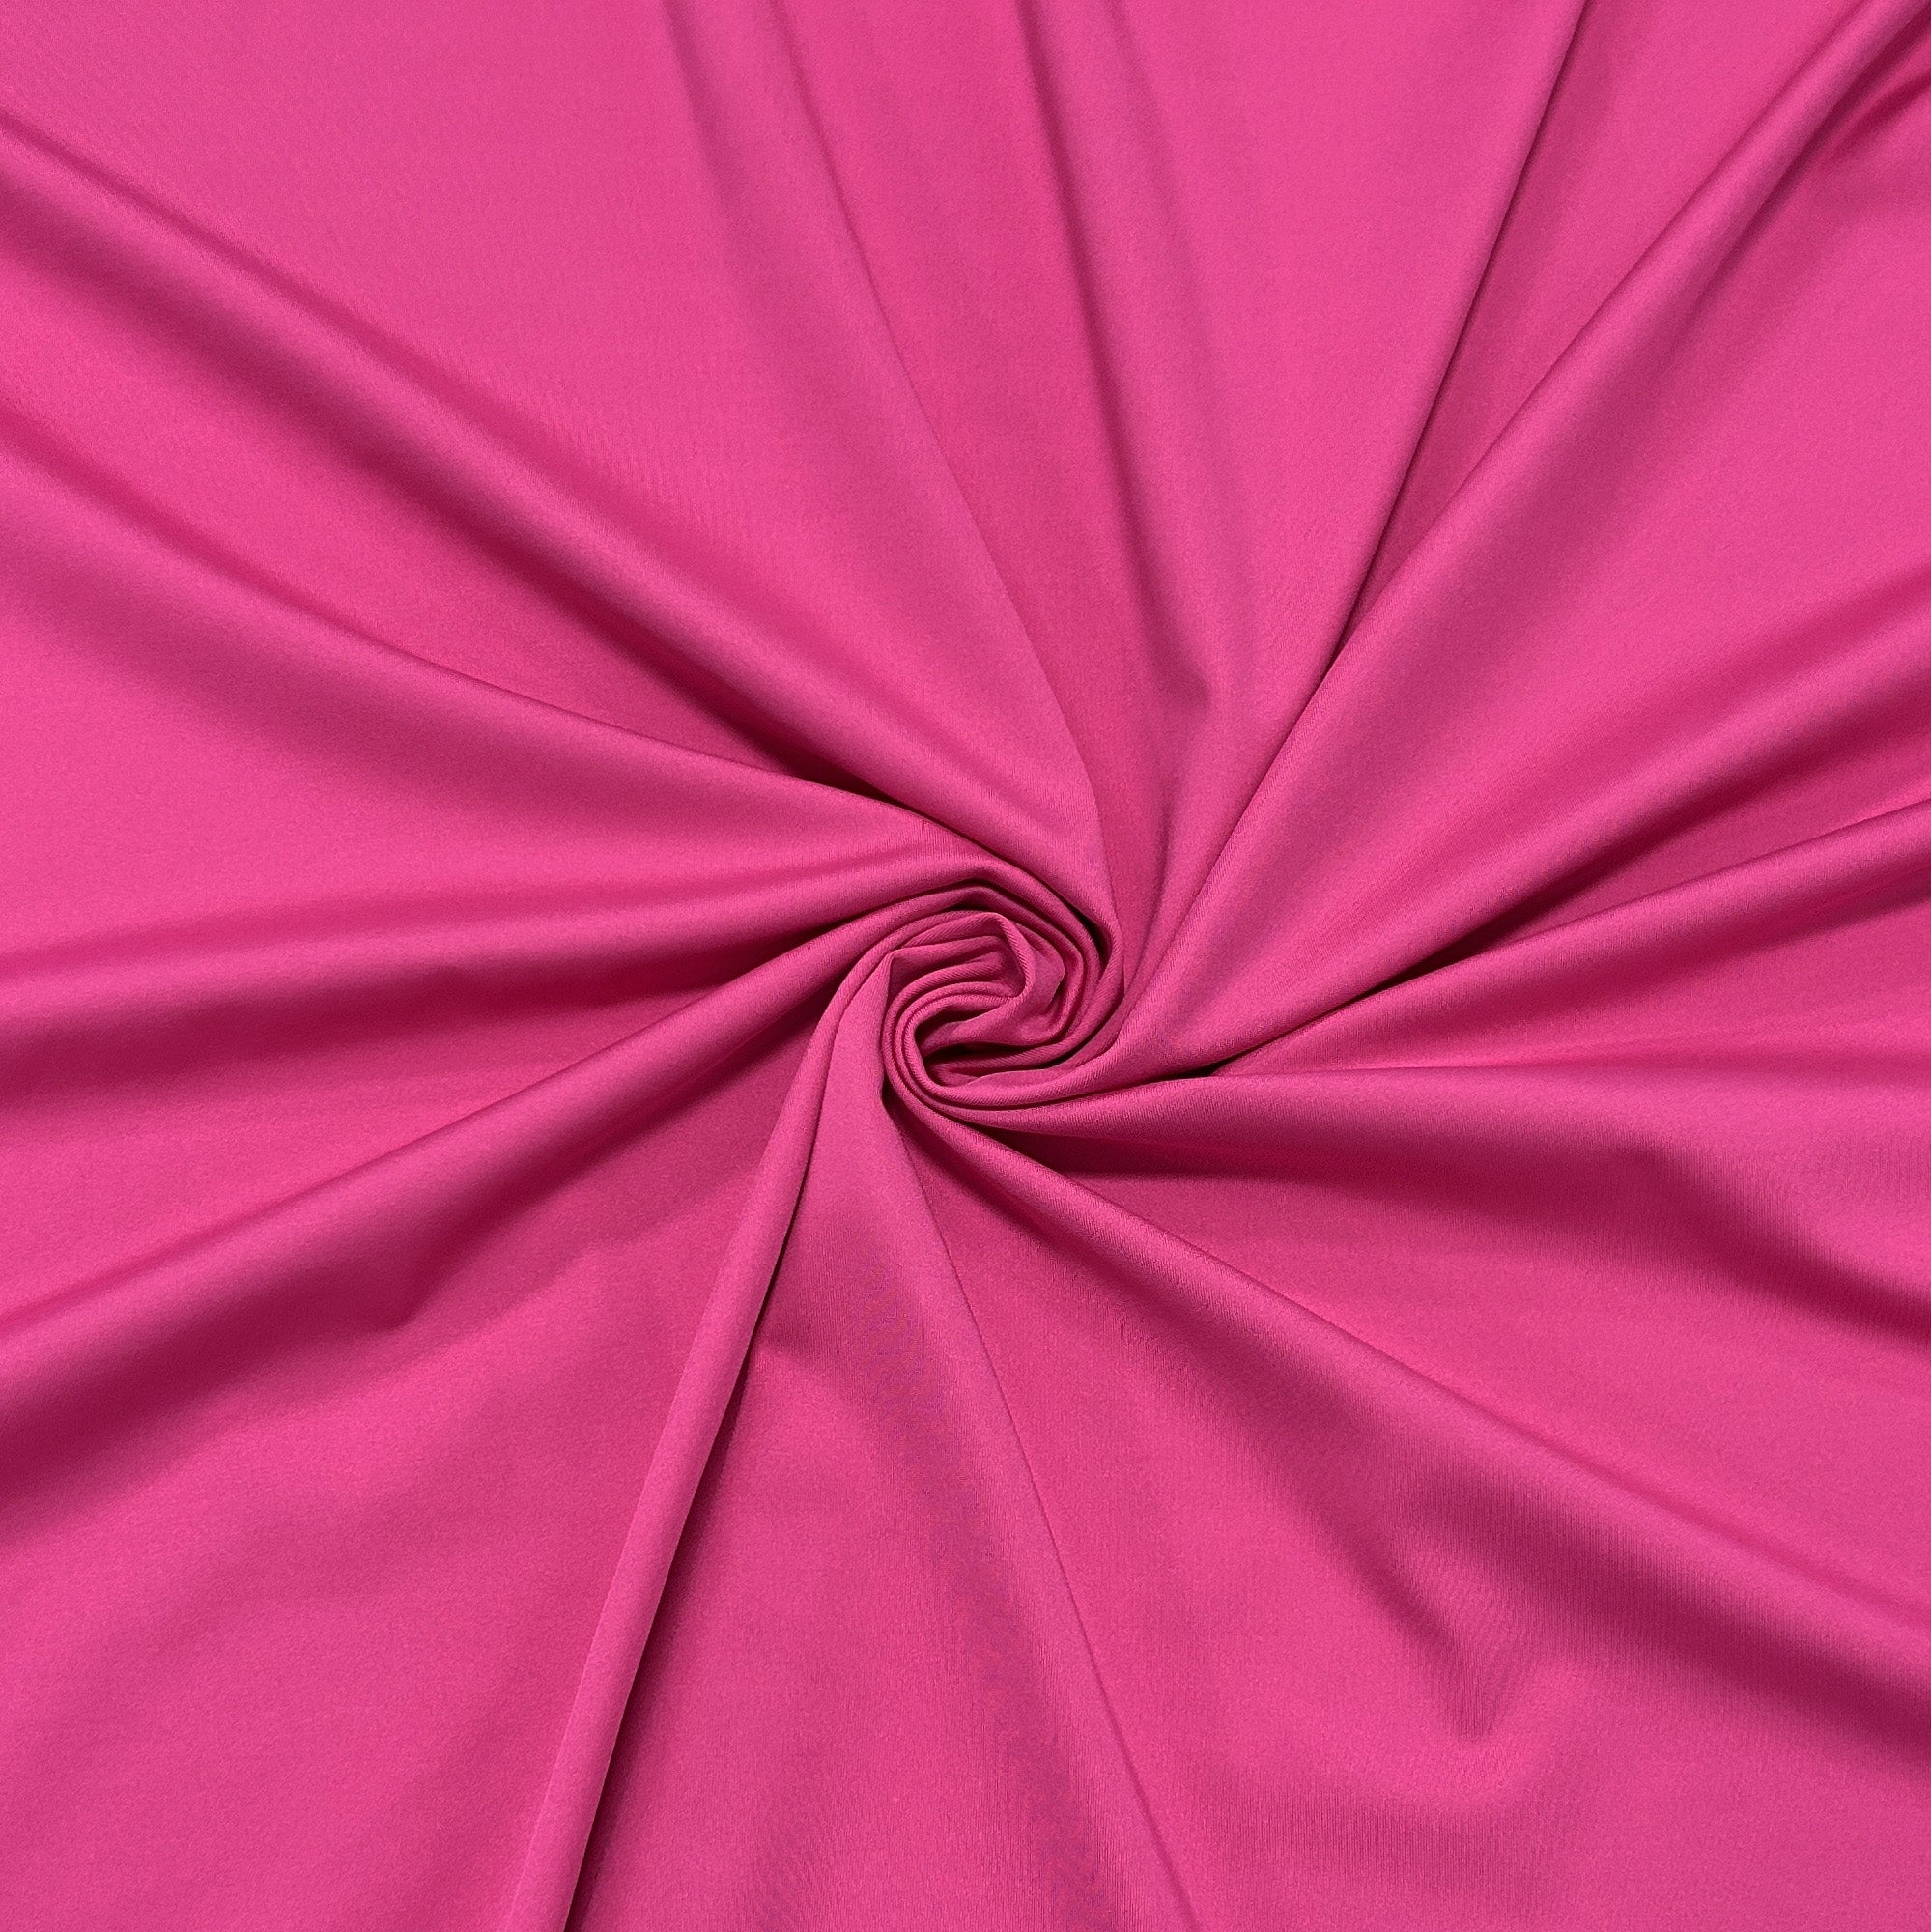 Solid Fuchsia 4 Way Stretch Moisture Wicking Athletic Performance Knit Fabric